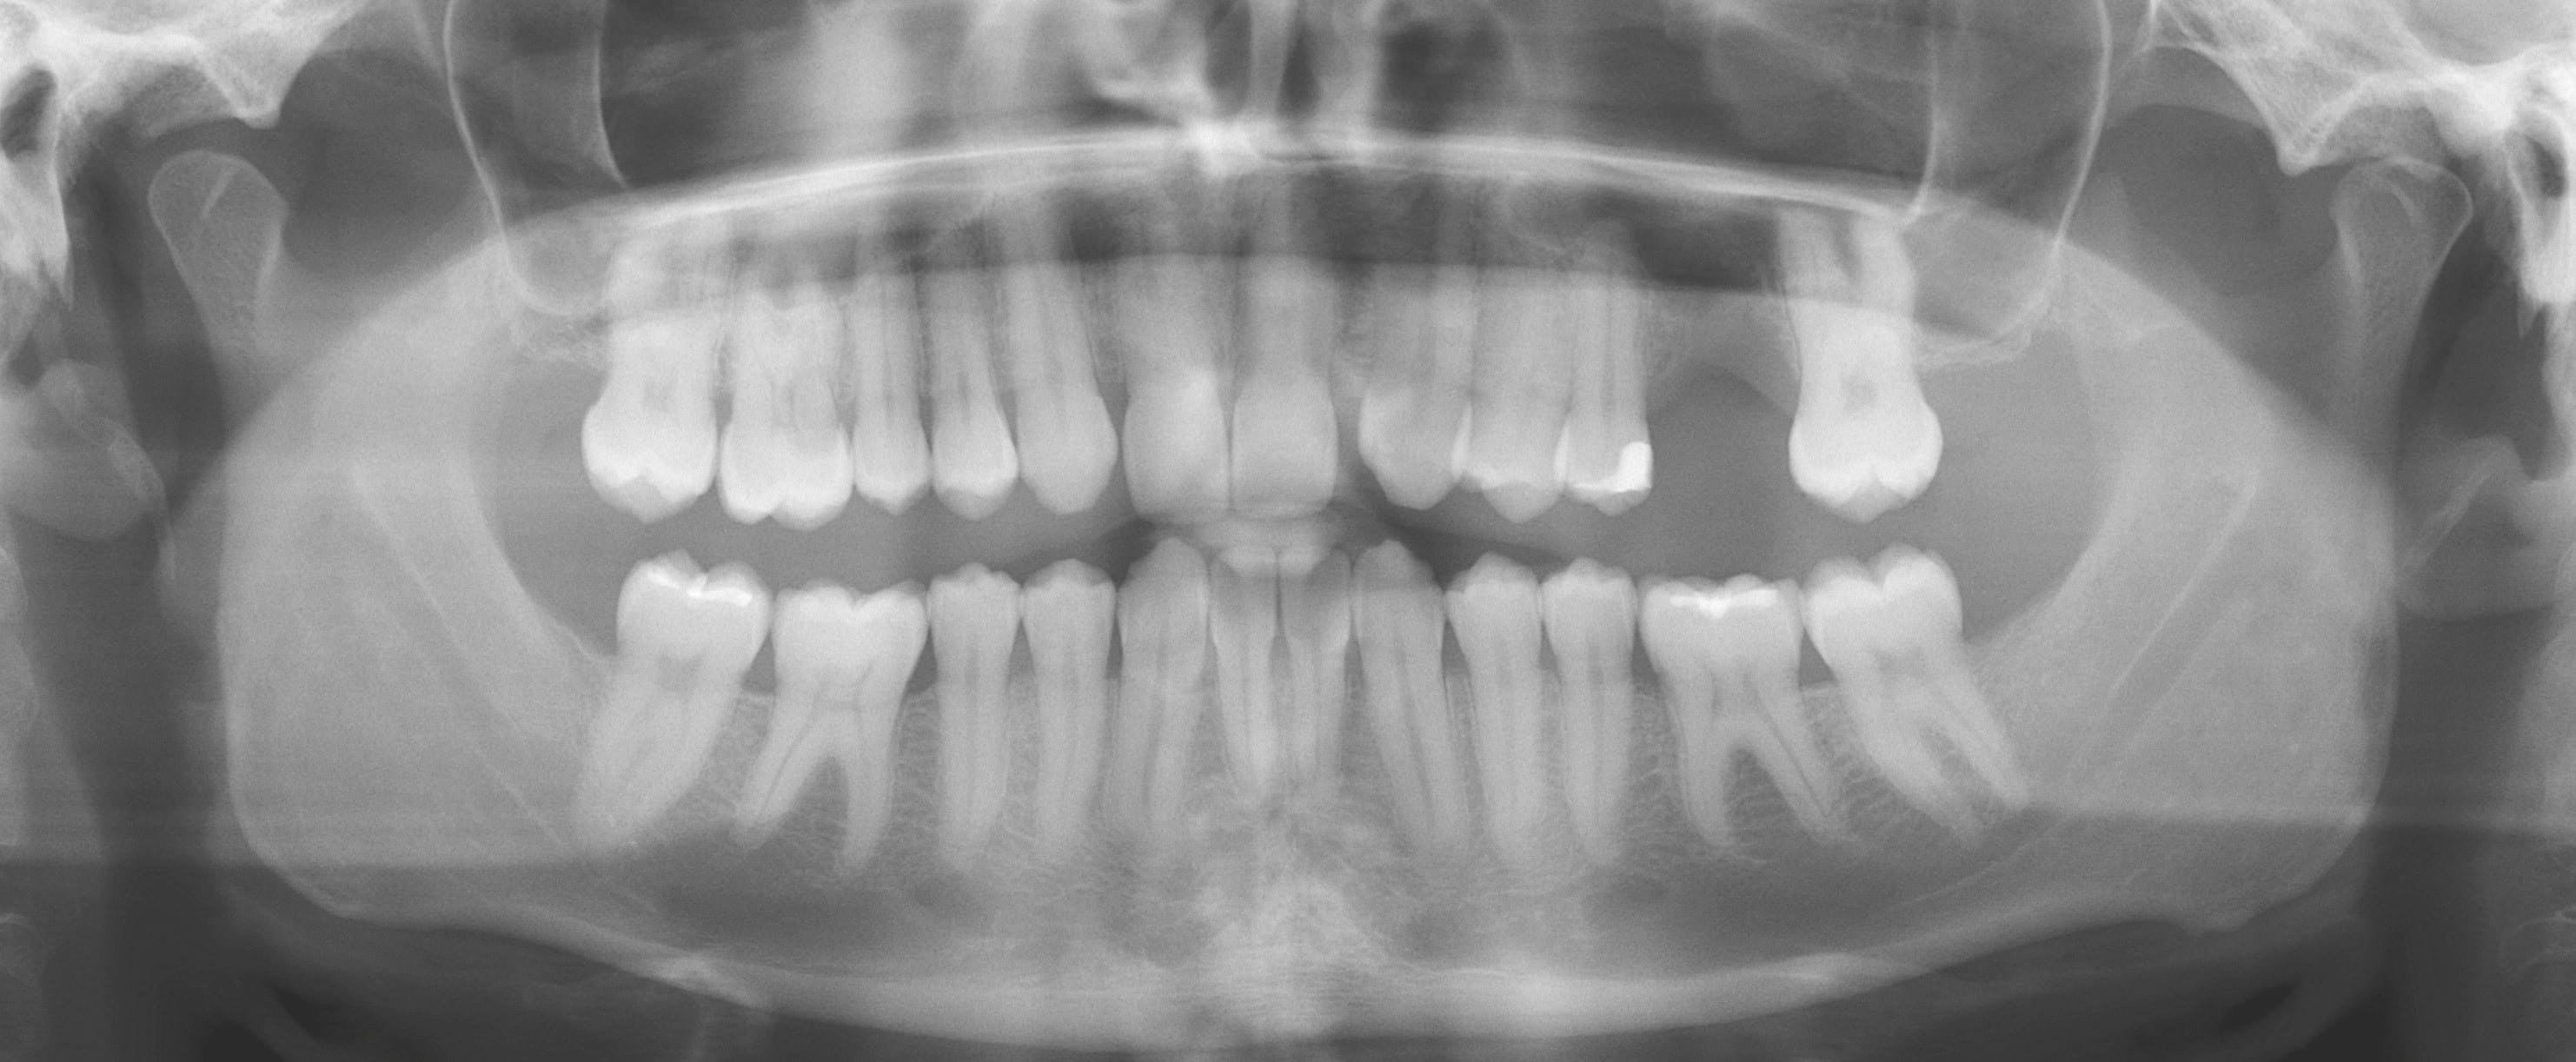 Figure 2: Panoramic view of the patient exhibiting the single-tooth gap in the upper left posterior maxilla